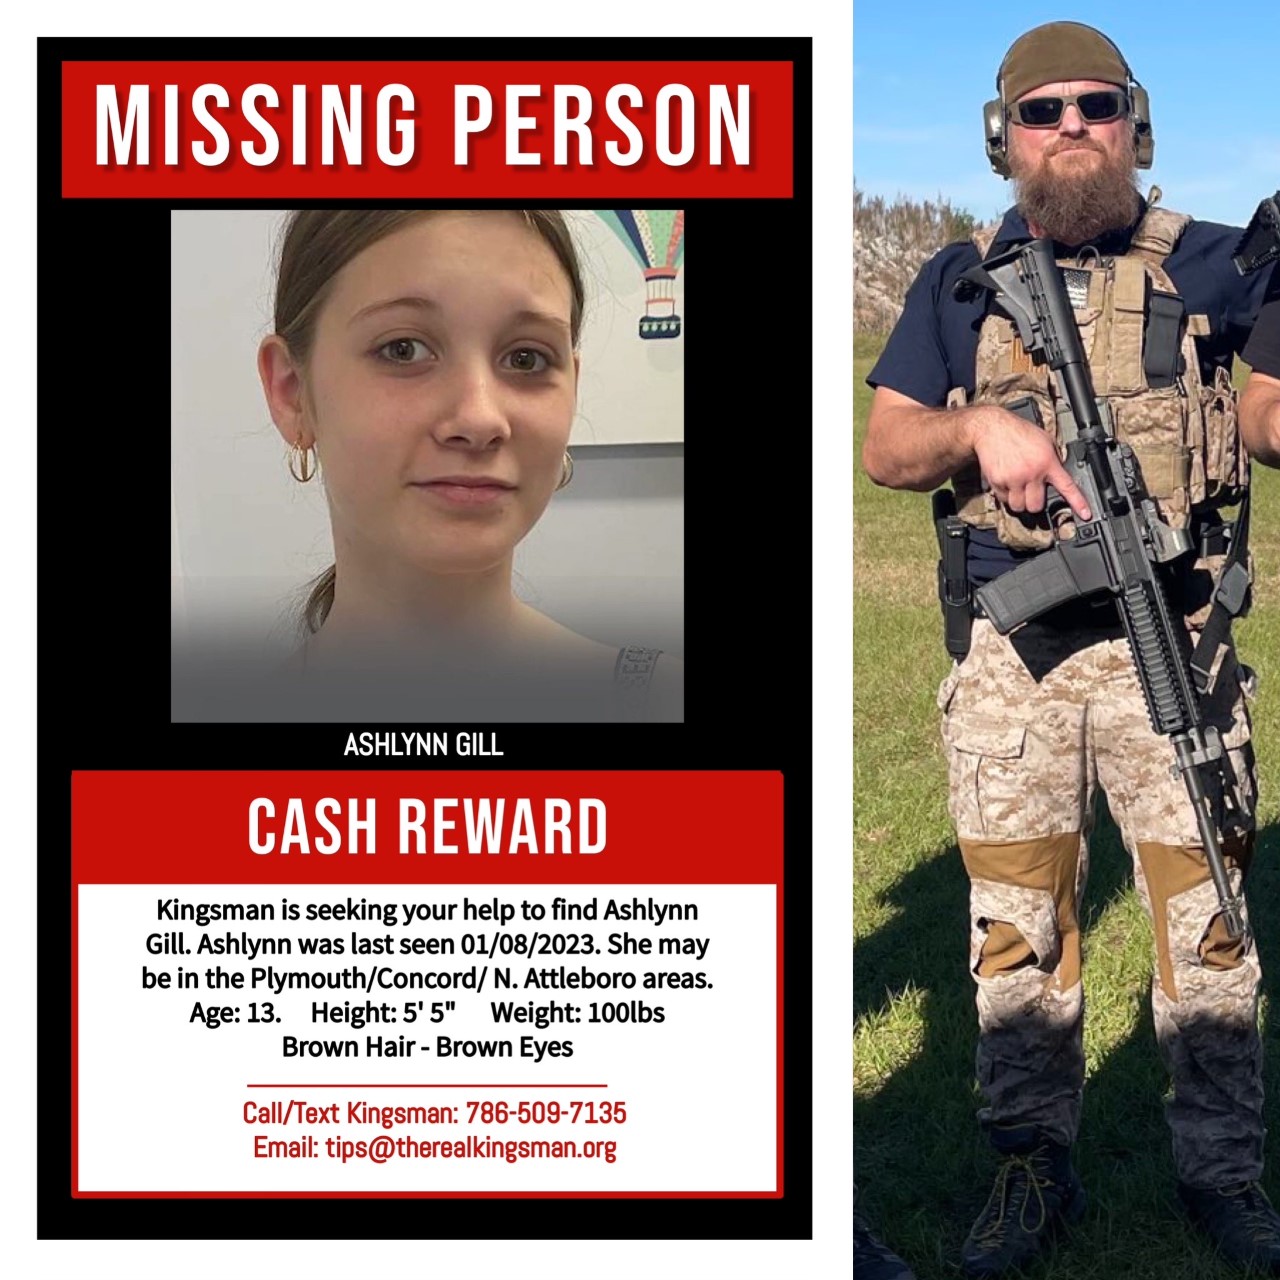 USPA dispatches former Navy SEALs to Massachusetts to search for a 13-year-old girl who has been reported missing